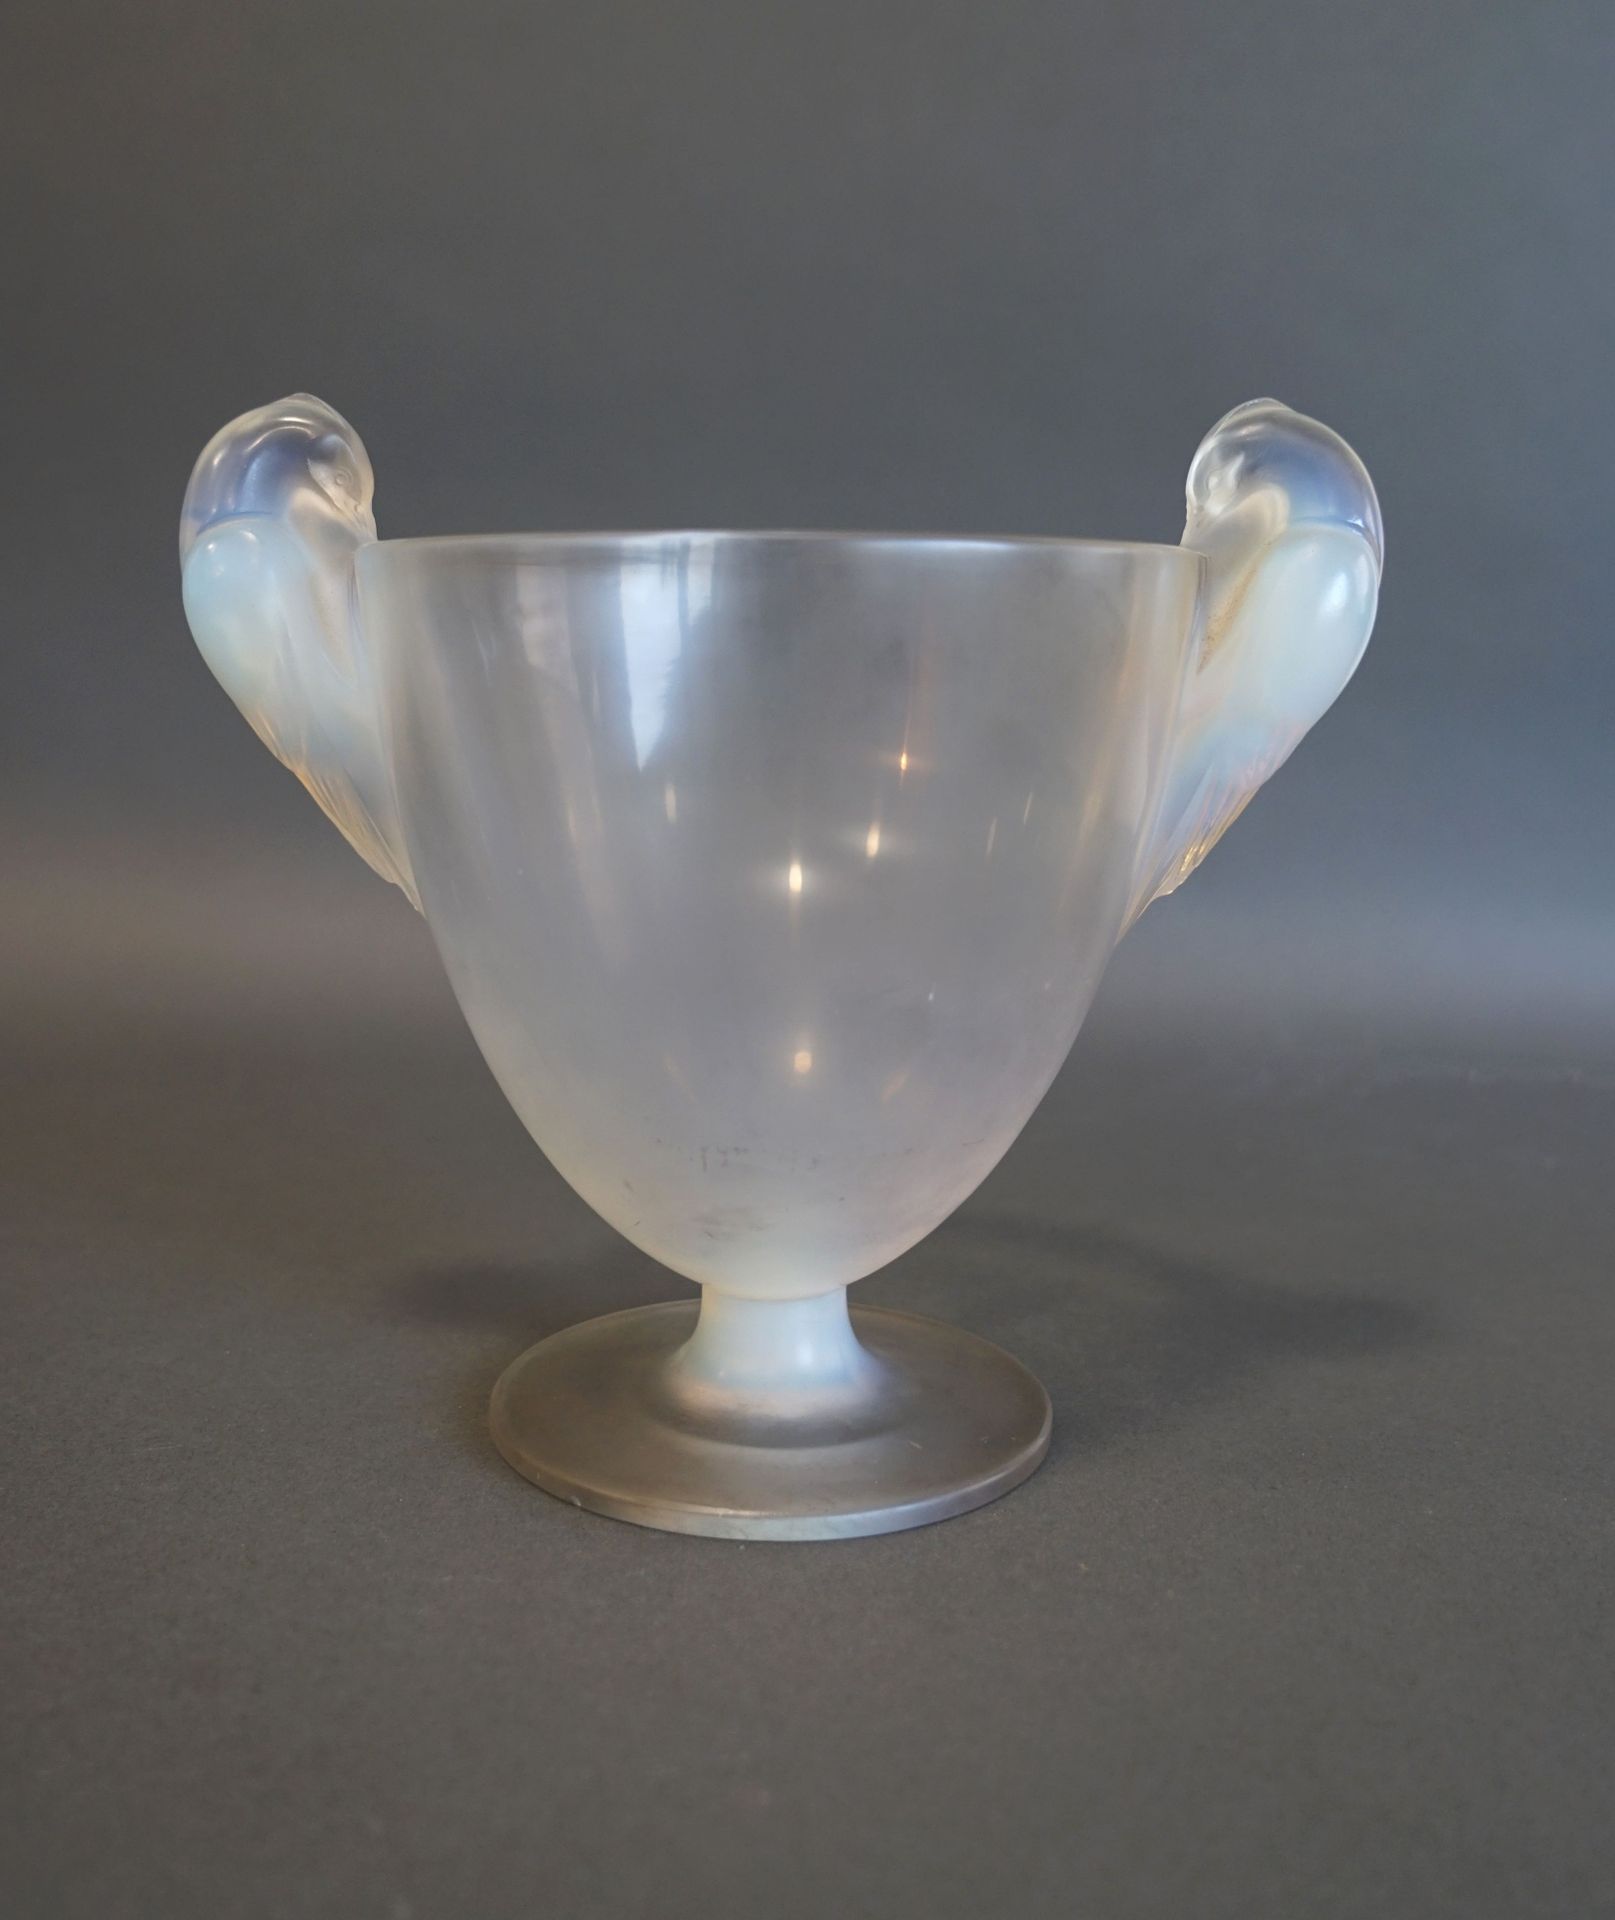 Null René LALIQUE (1860-1940) Vase model "Ornis" with two handles out of white g&hellip;